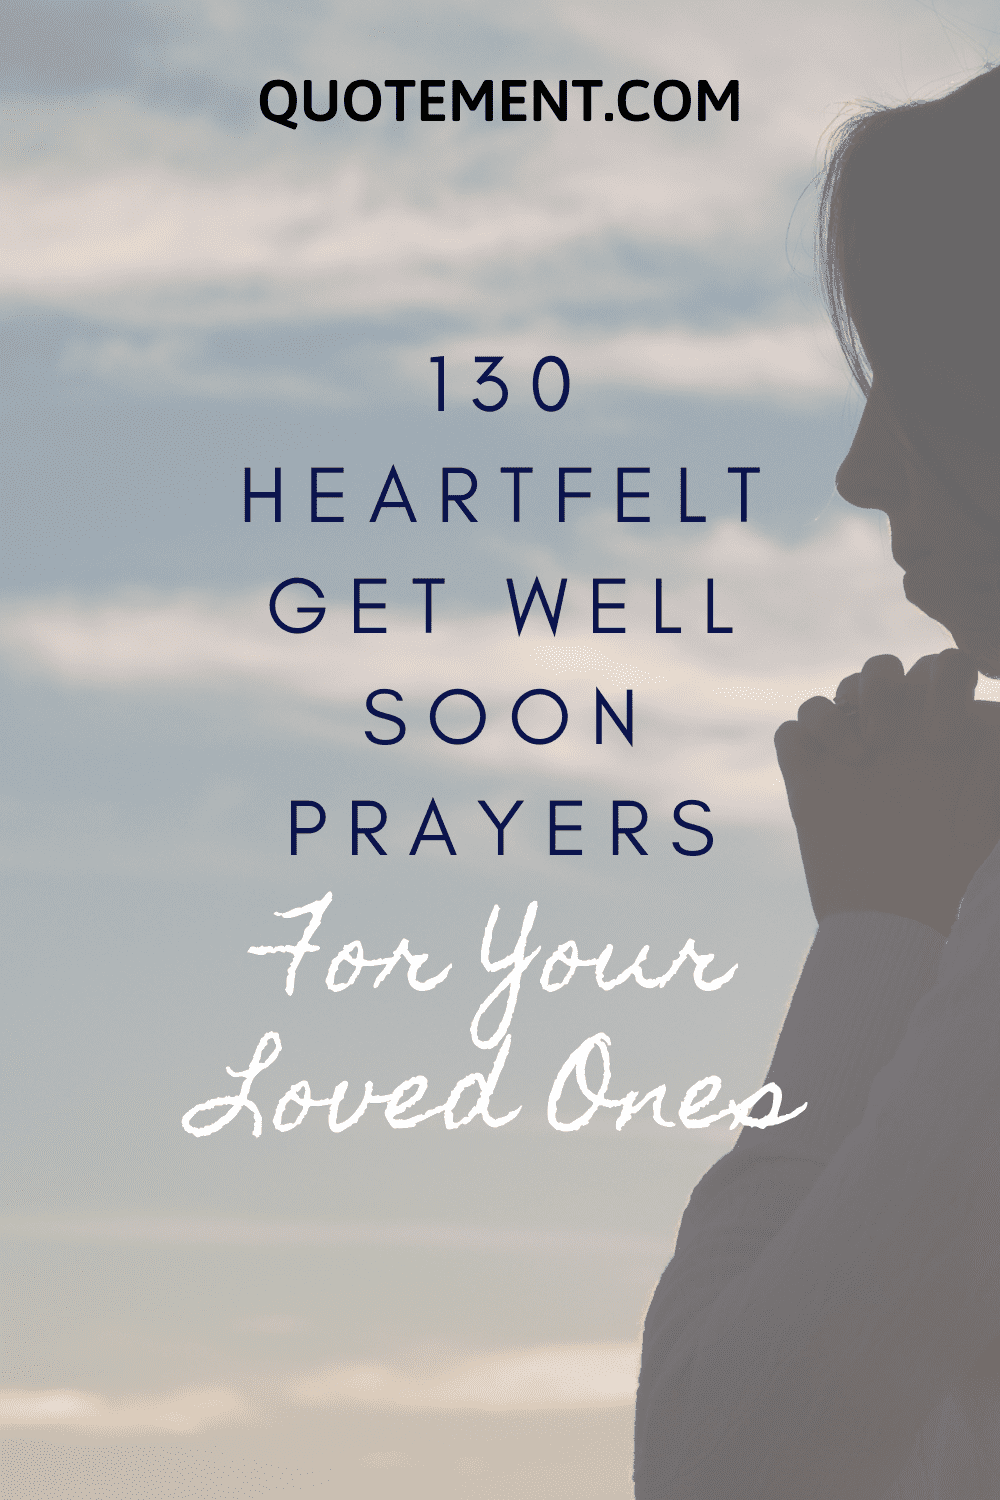 130 Heartfelt Get Well Soon Prayers For Your Loved Ones